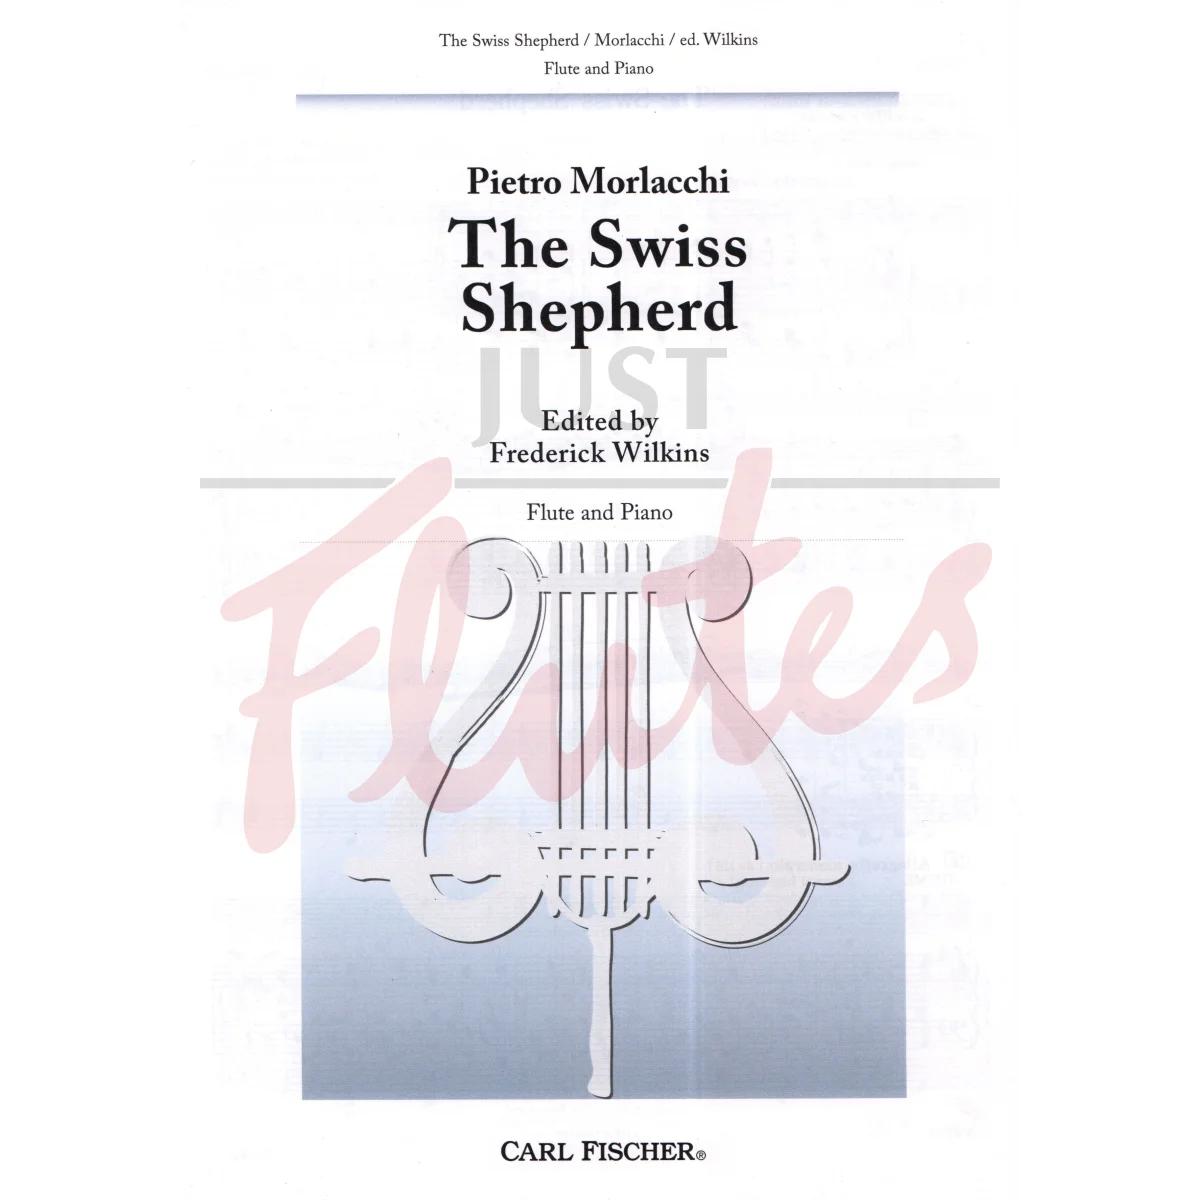 The Swiss Shepherd for Flute and Piano